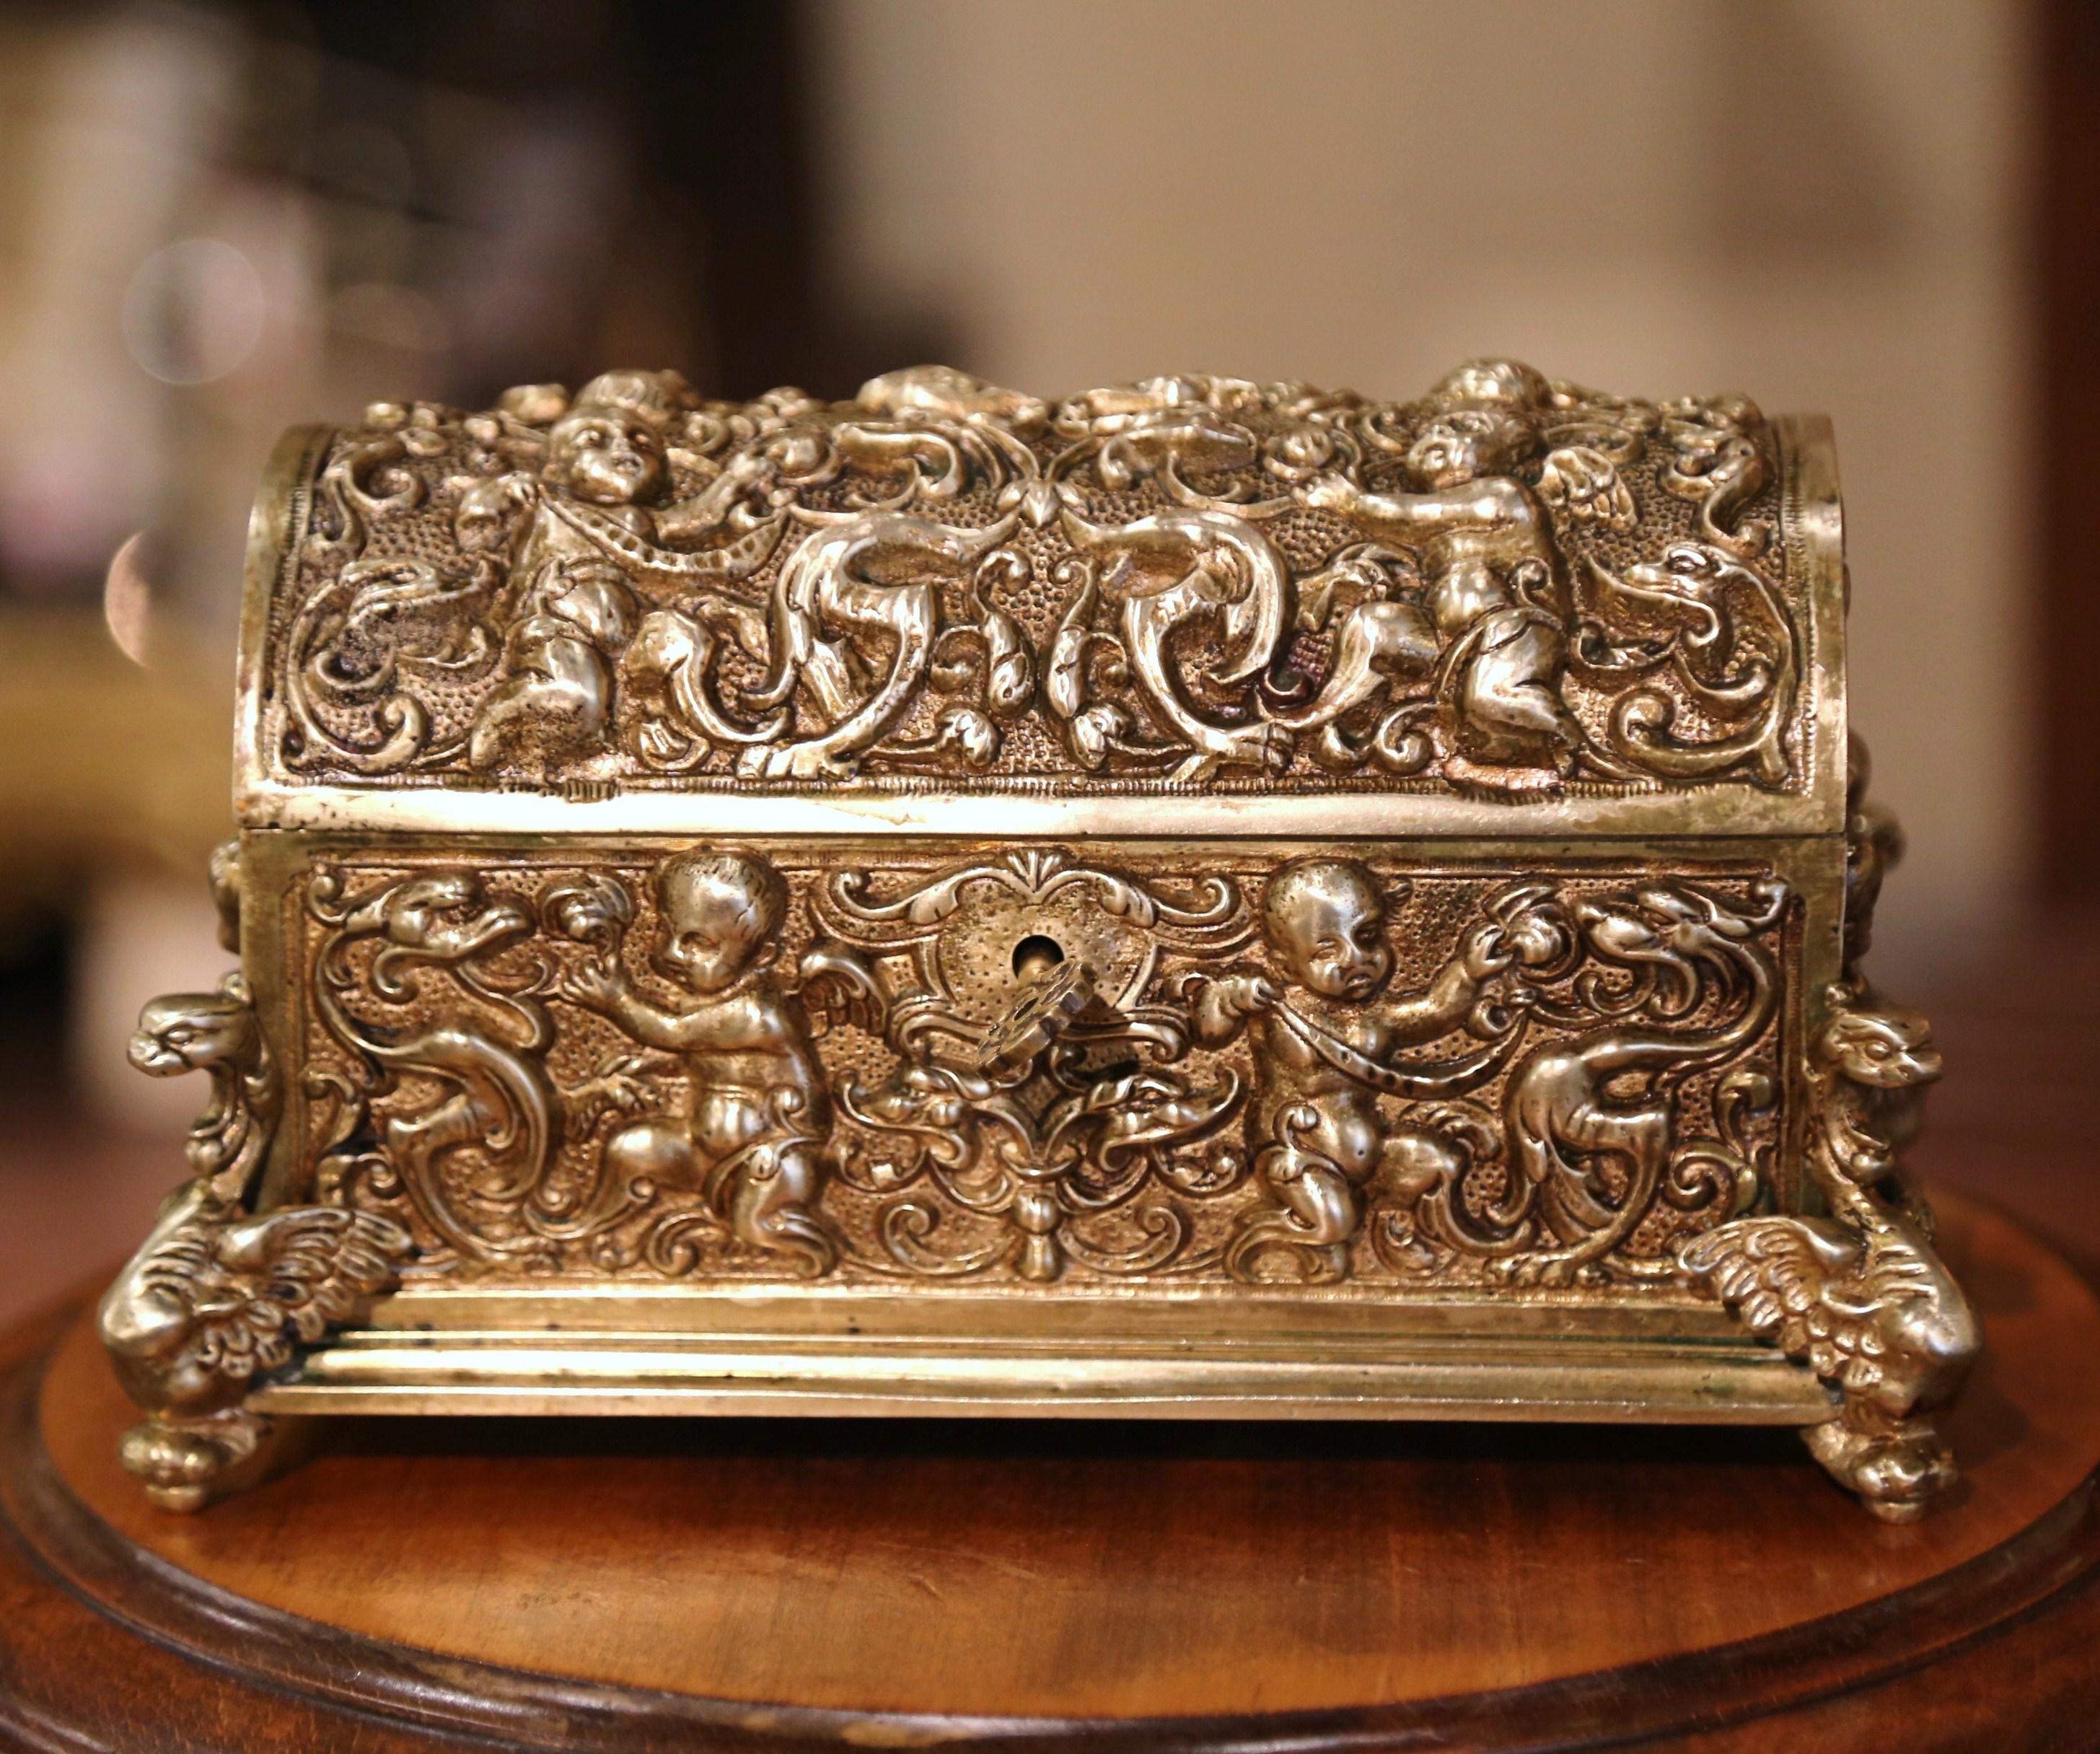 This antique gilt bronze casket was created in France, circa 1870. The miniature trunk-shaped box with bombe top, stands on gargoyle figure feet, and is embellished with intricate repousse cherub and scrolled decor on all four sides. The jewelry box